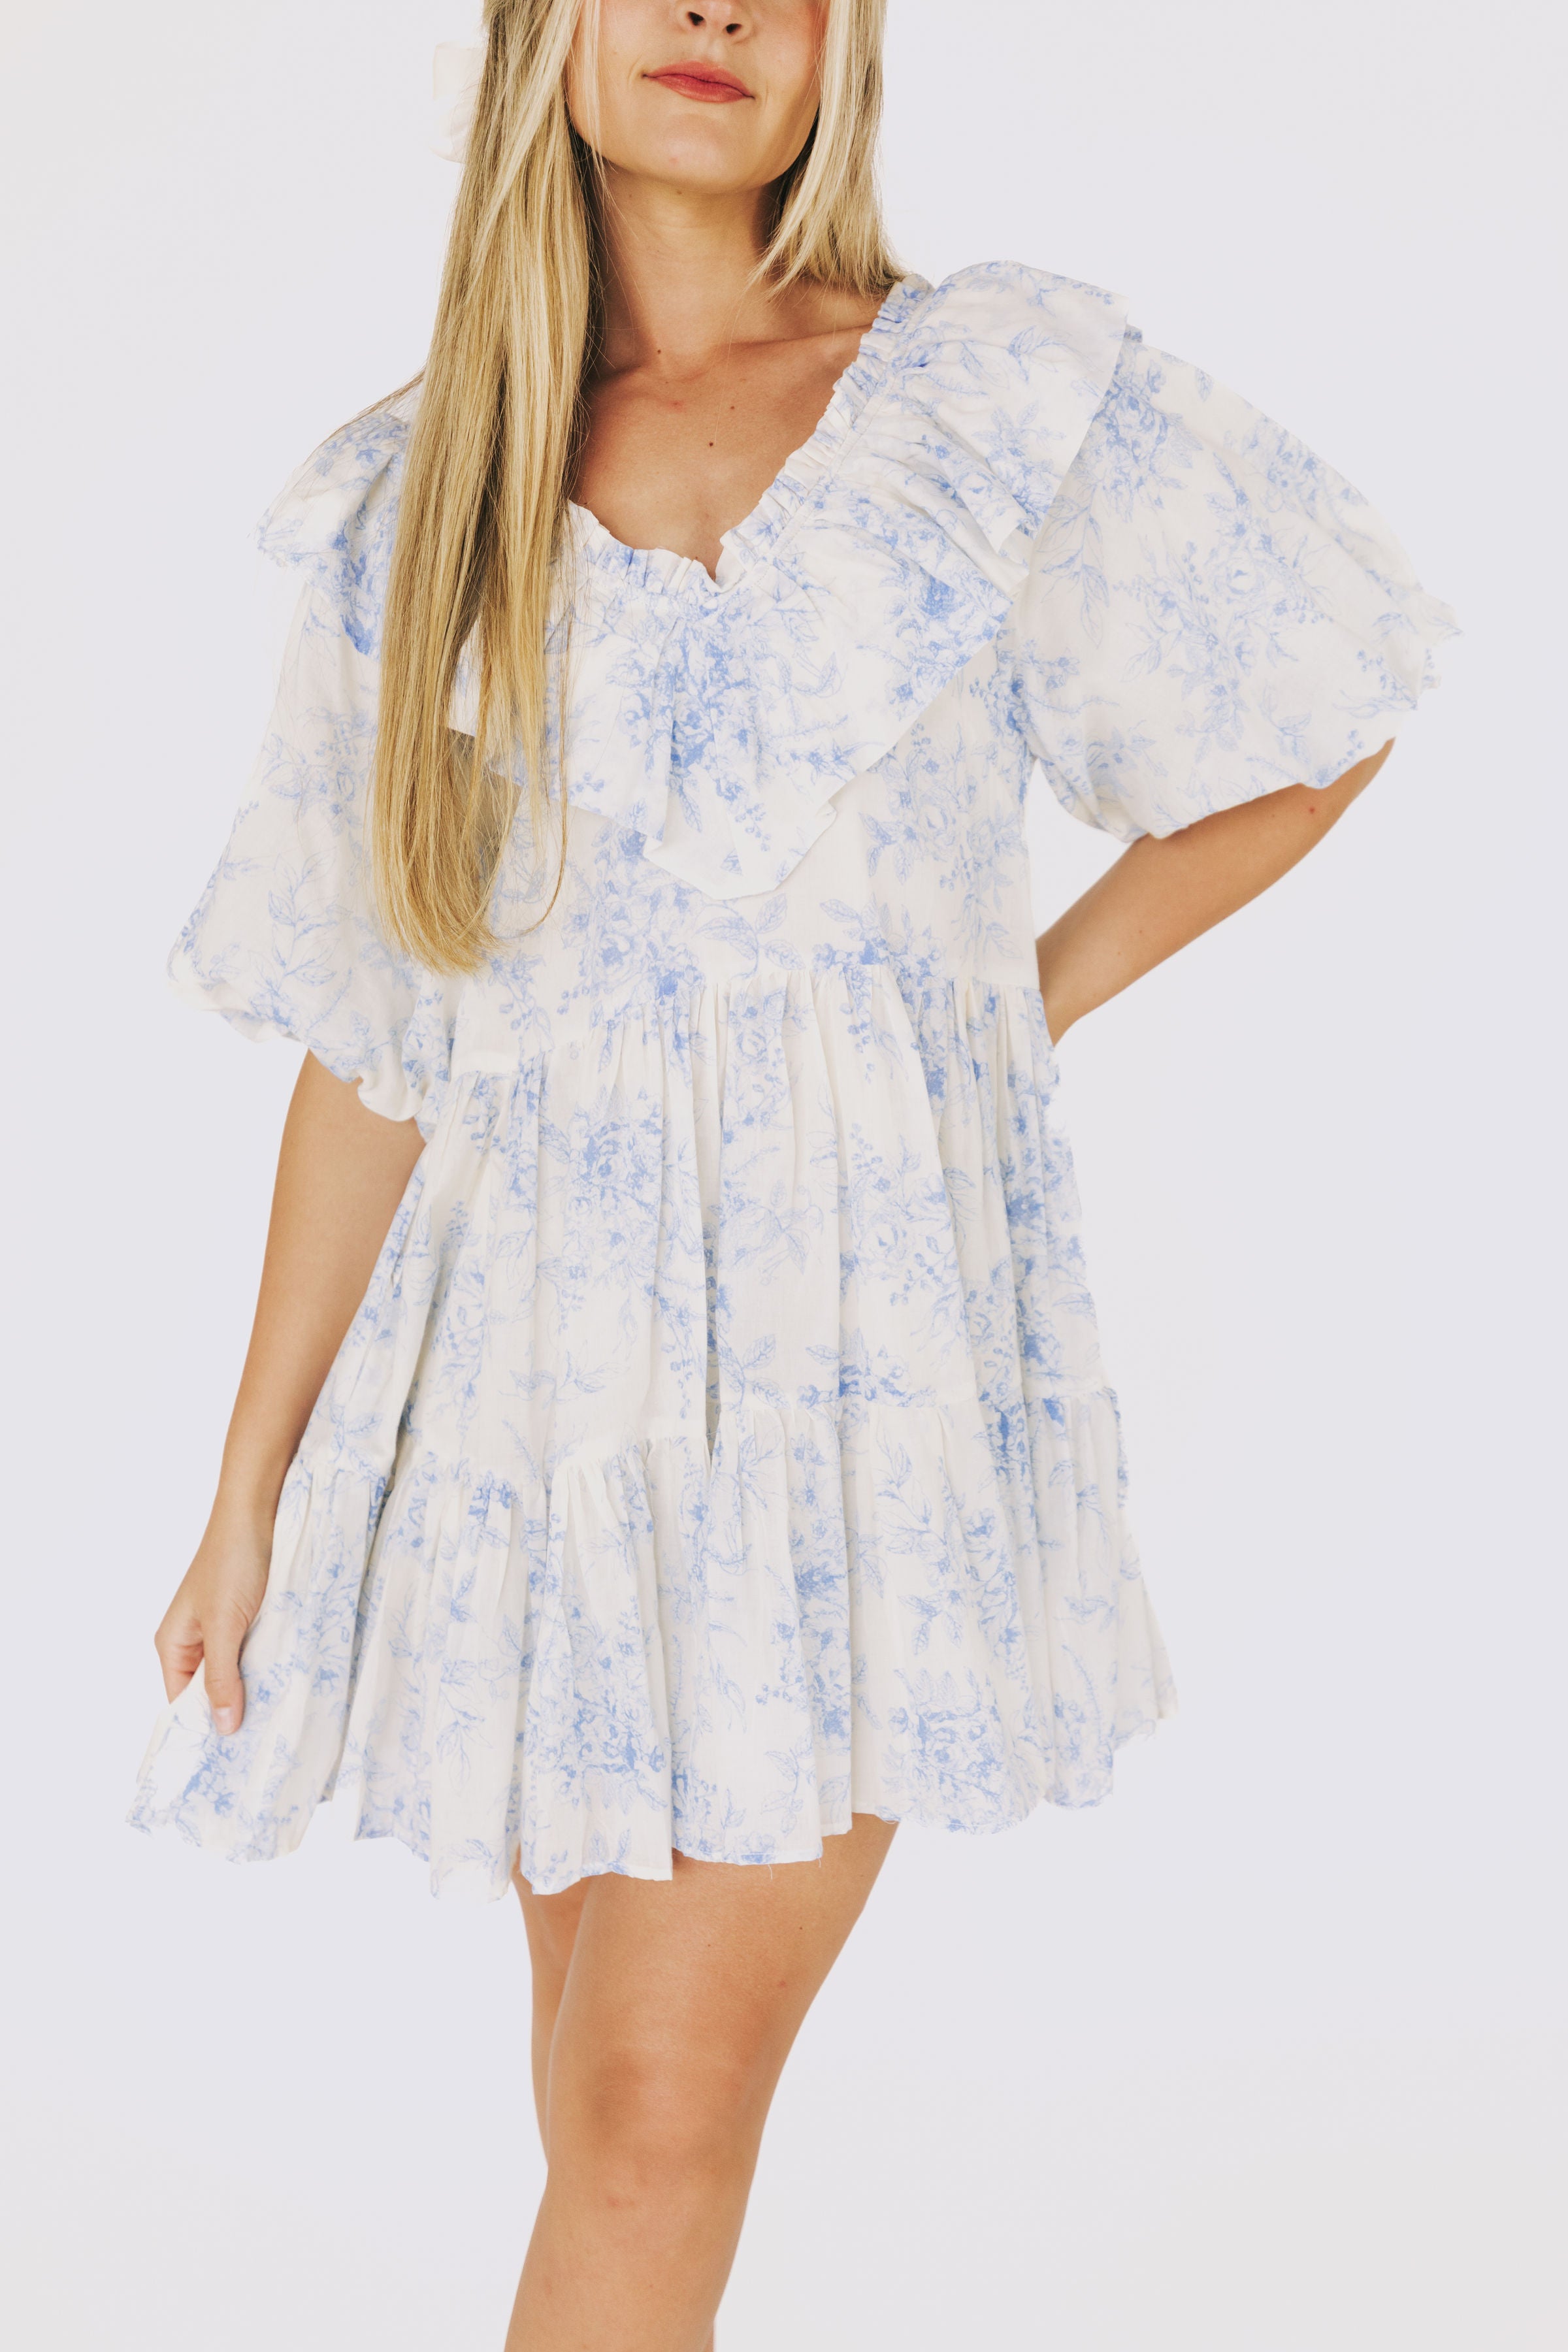 Baby Blue Blossoms Dress